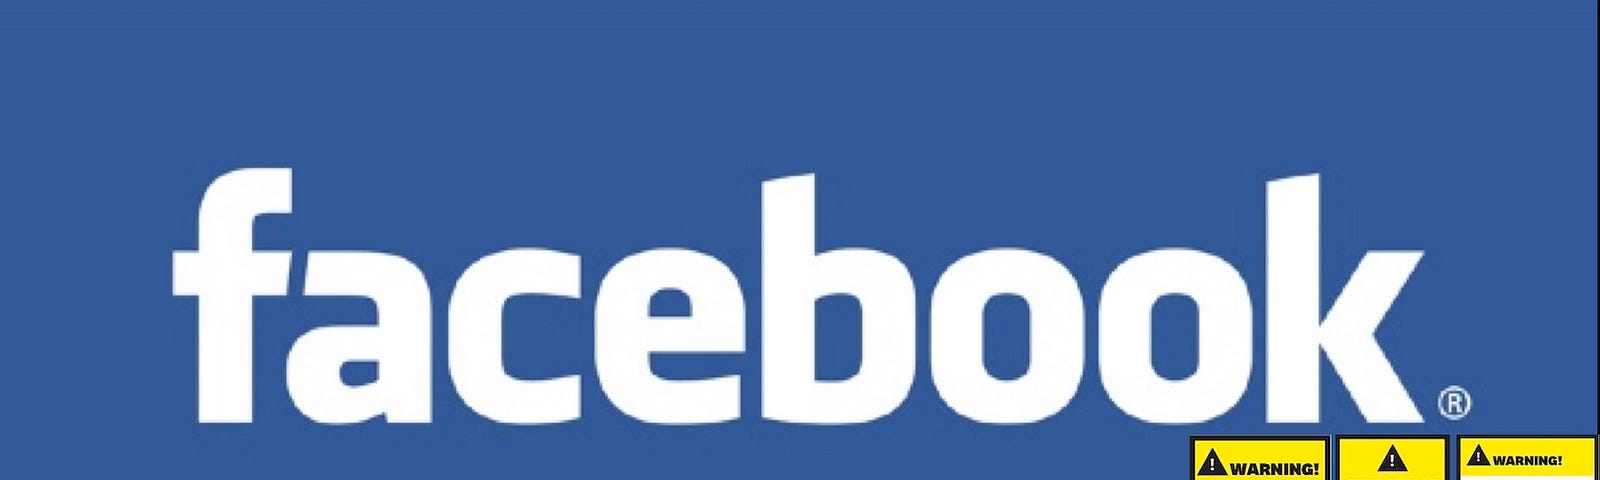 IMAGE: A Facebook logo with three random health warning labels created by the author in 2015